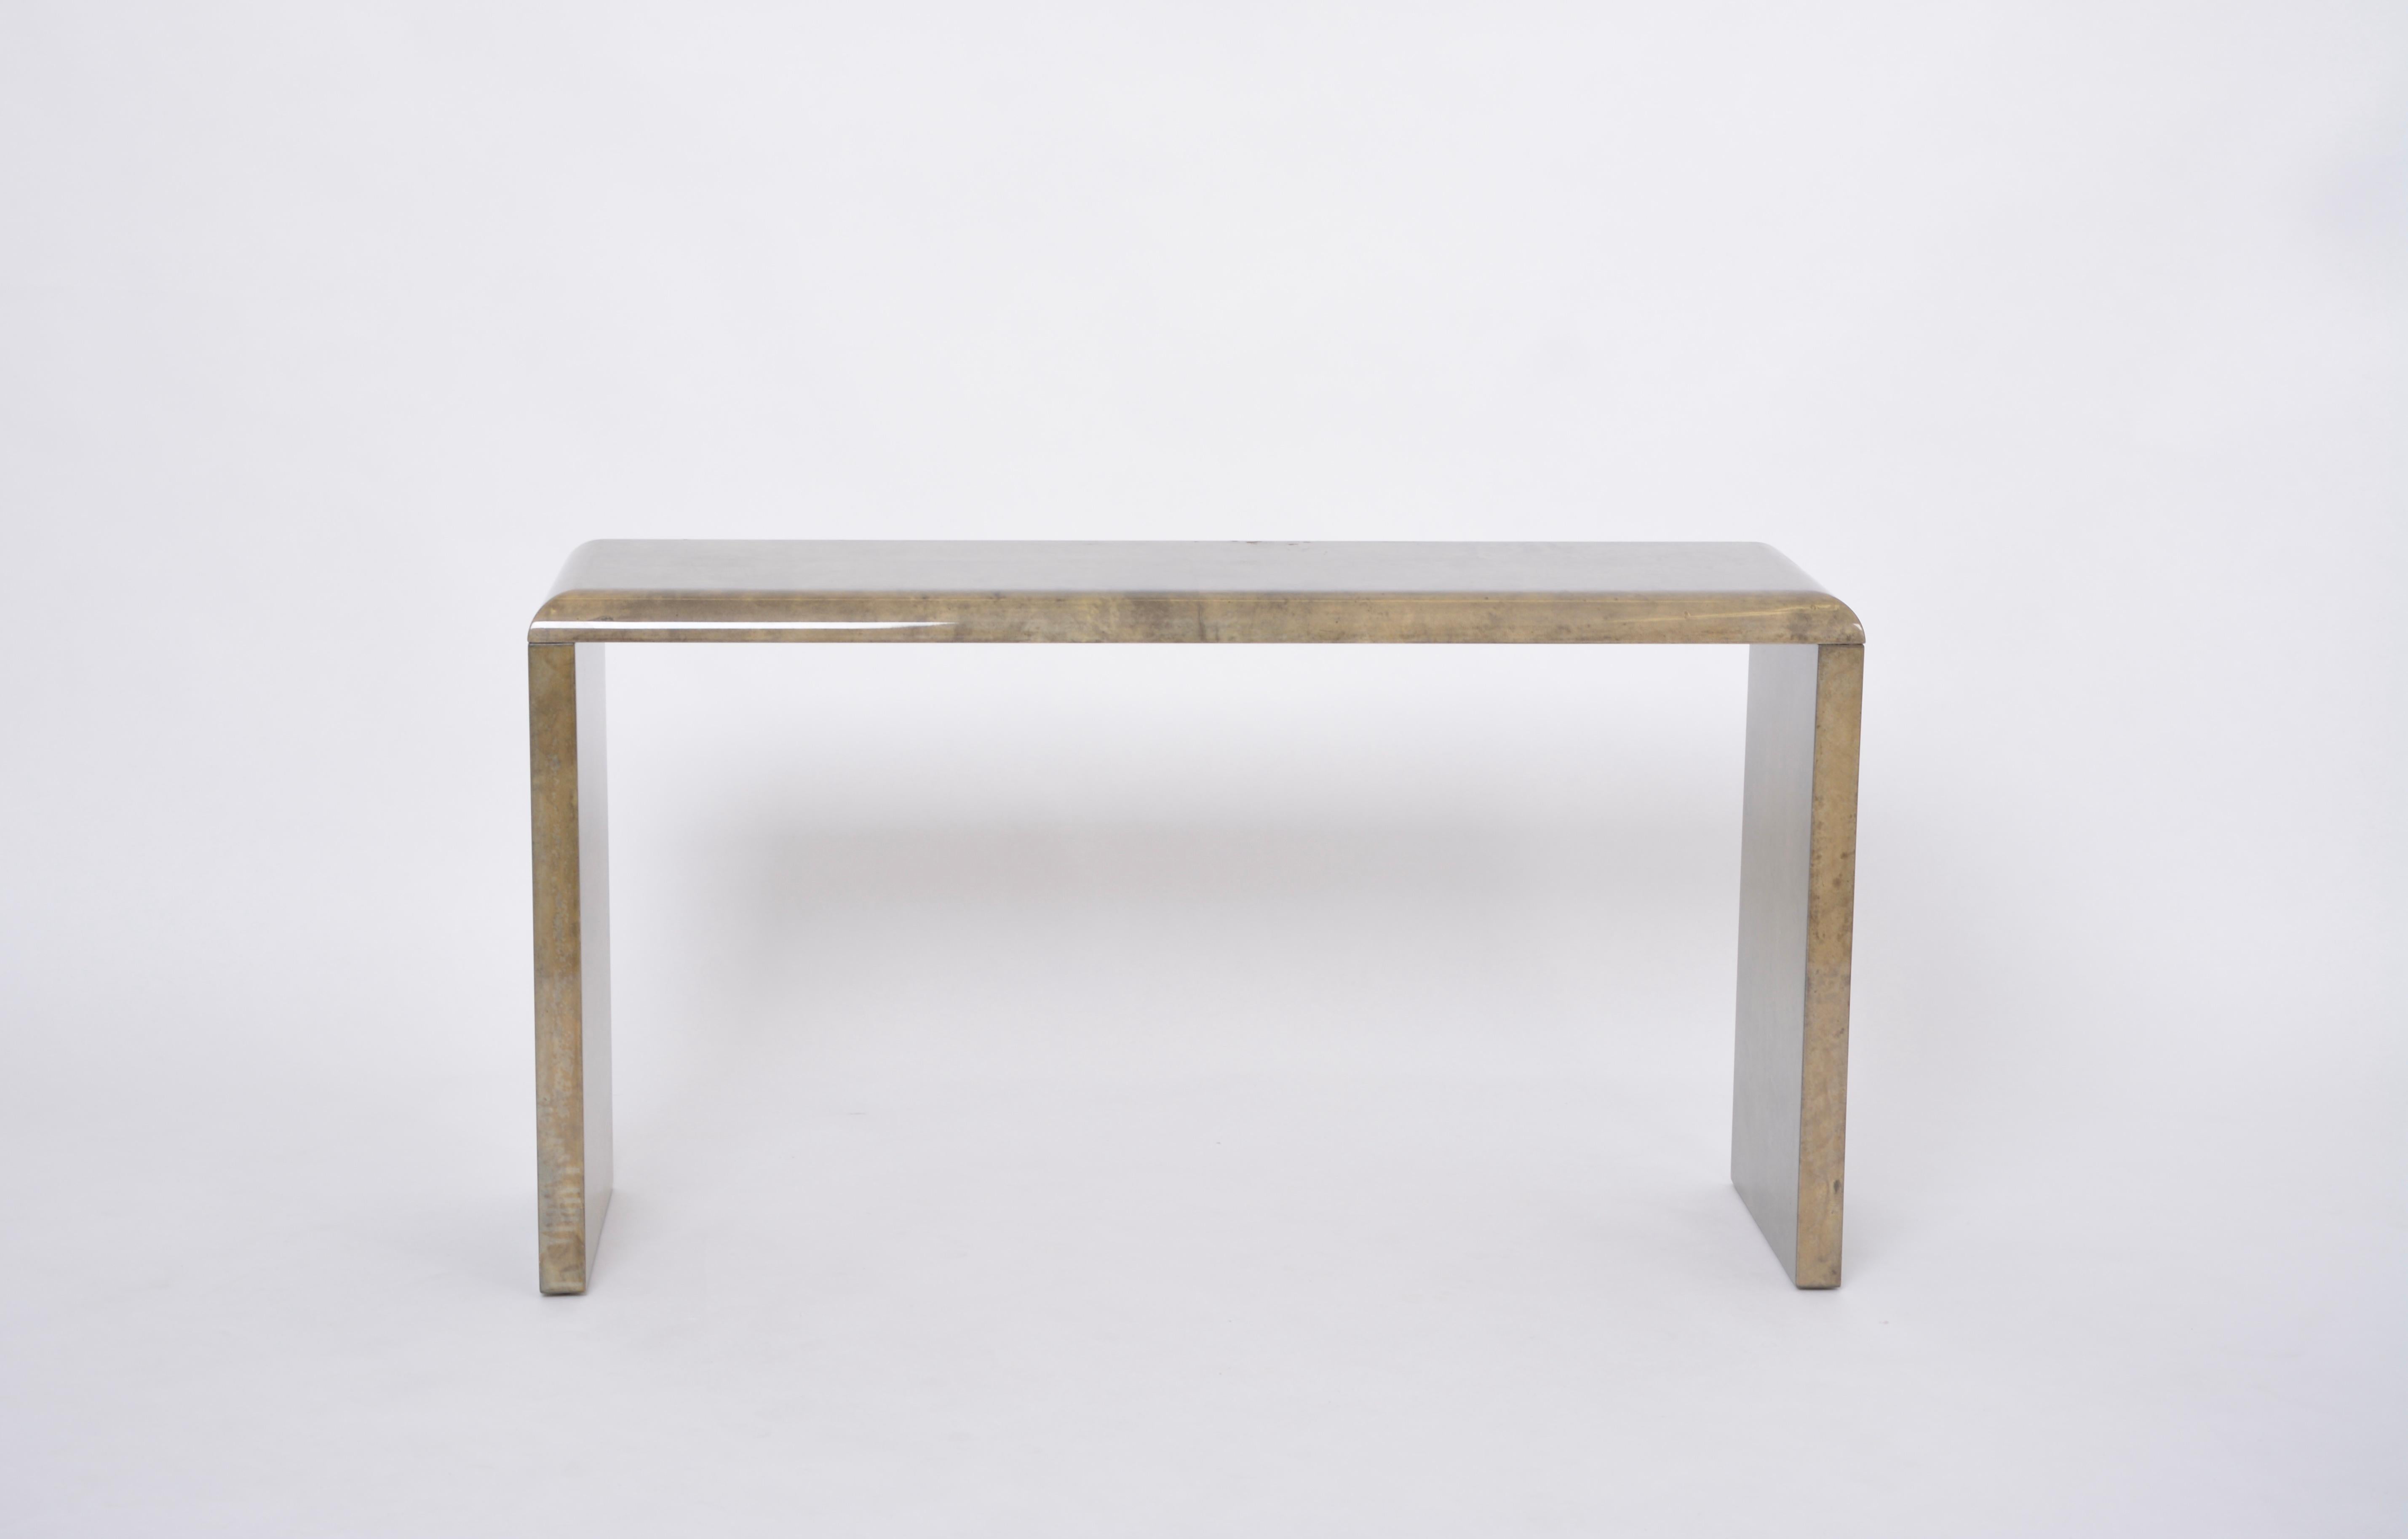 Mid-Century Modern Console Table Made of Laquered Goat Skin by Aldo Turabdesigned by Aldo Tura and produced in Italy approximately in the 1970s.
The console table has a wood structure which is covered in Aldo Tura's signature style parchment in